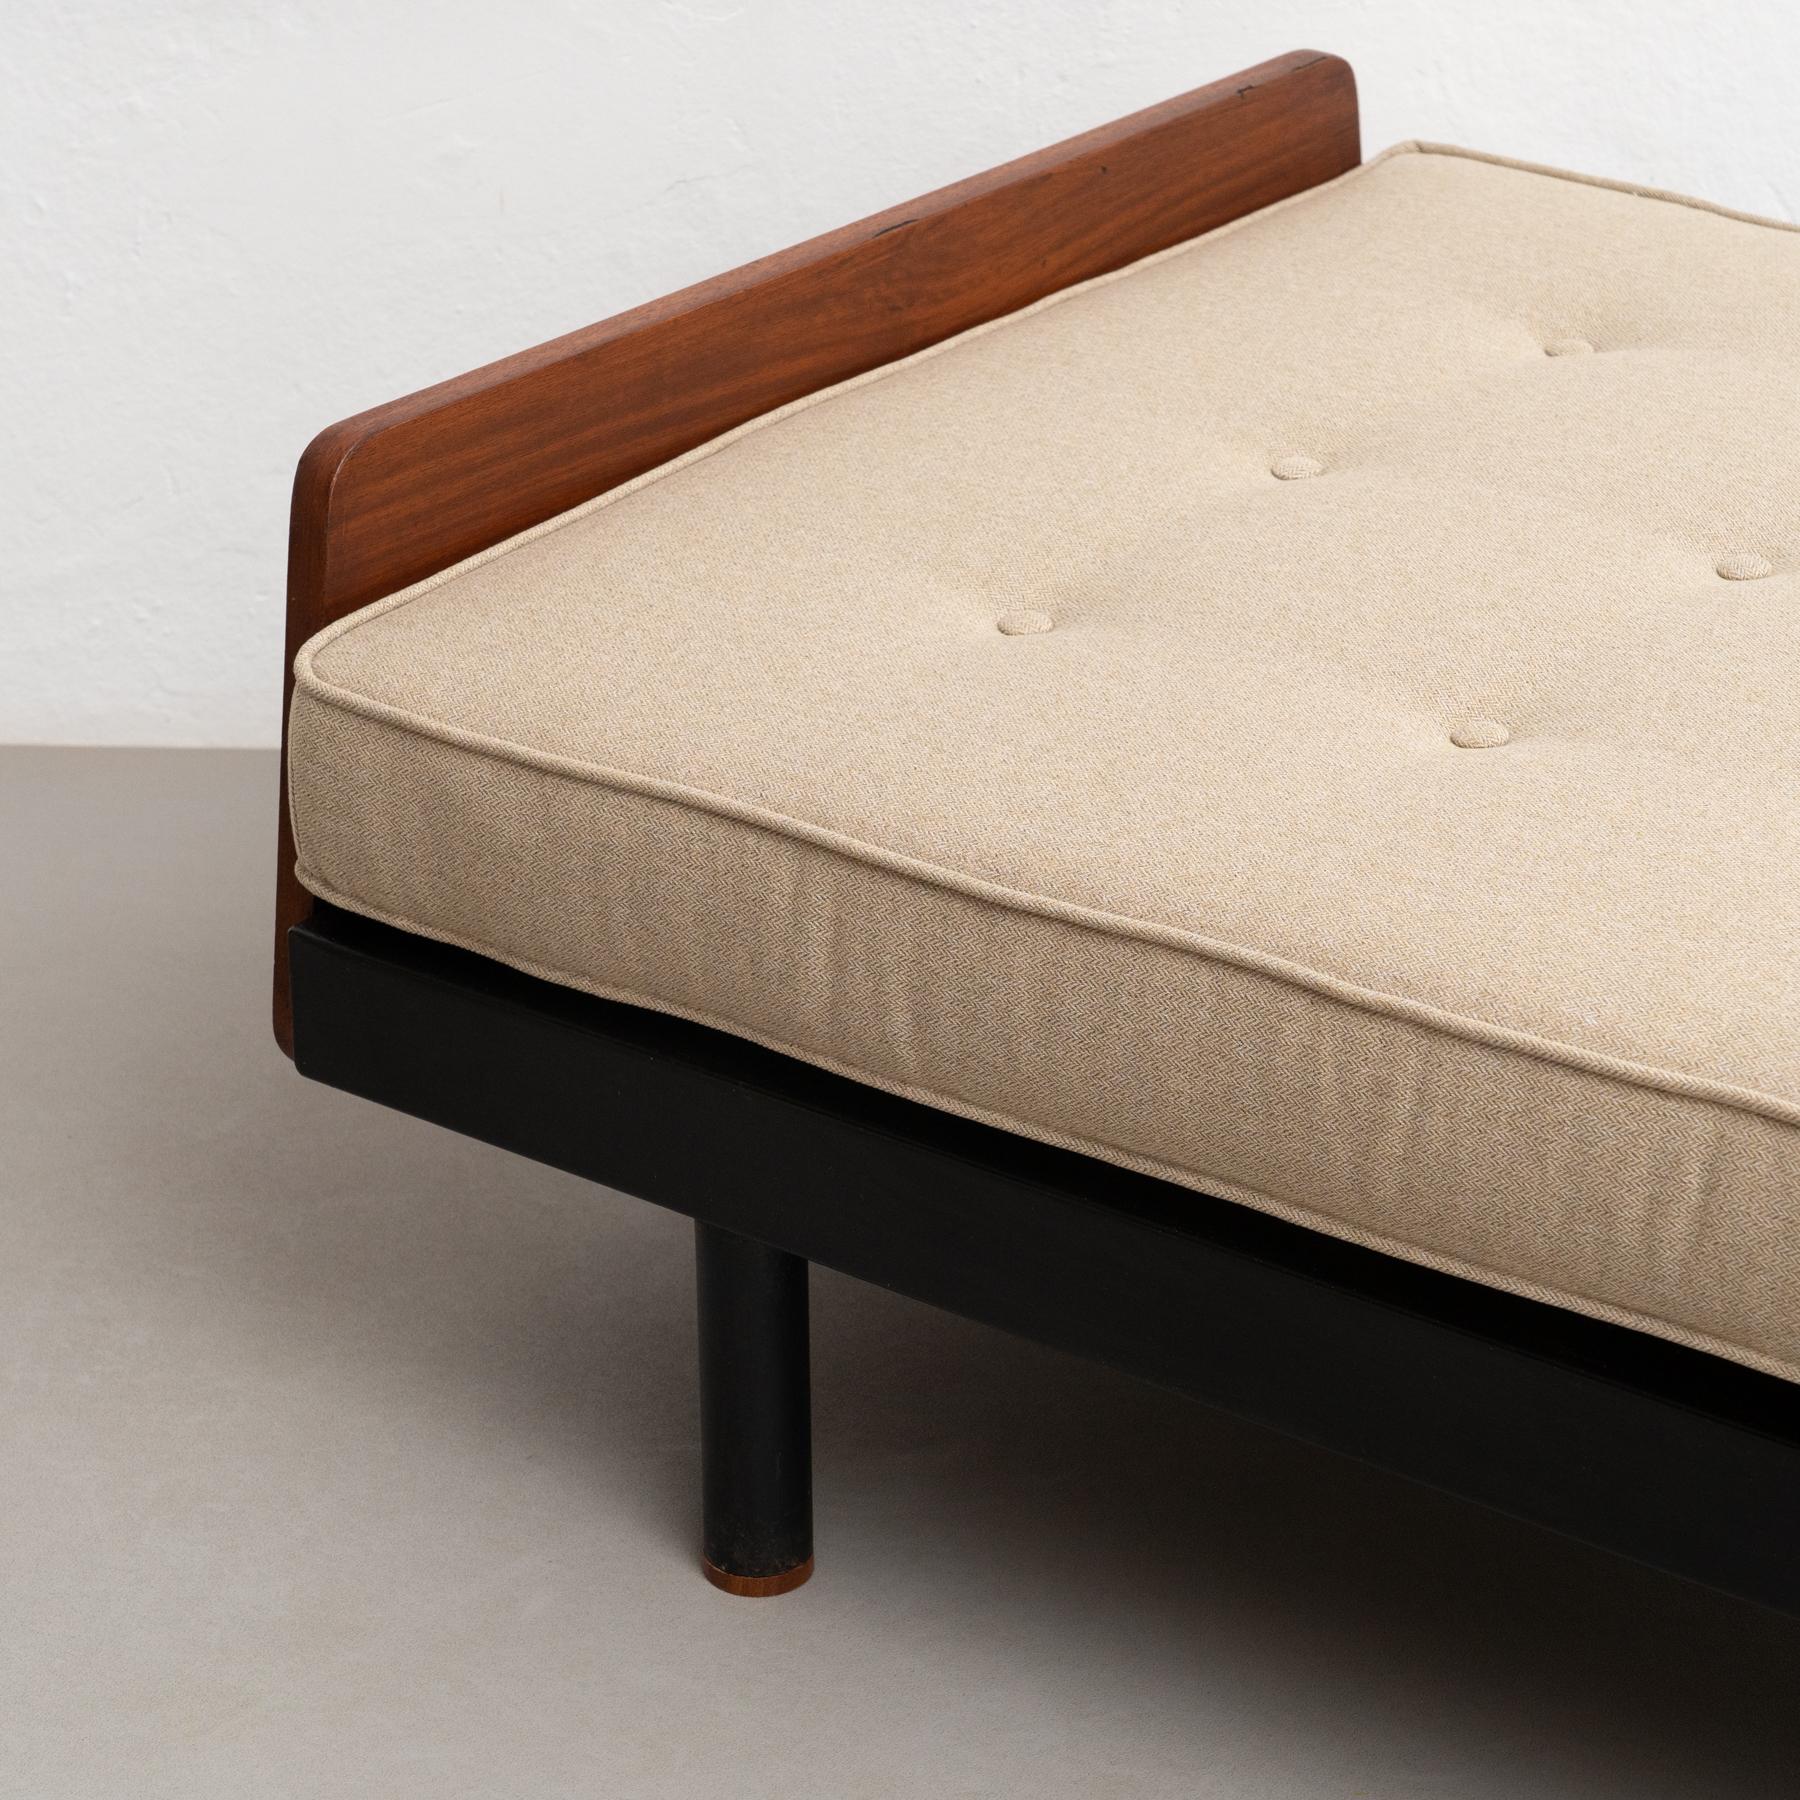 Jean Prouve Mid-Century Modern S.C.A.L. Daybed, circa 1950 2